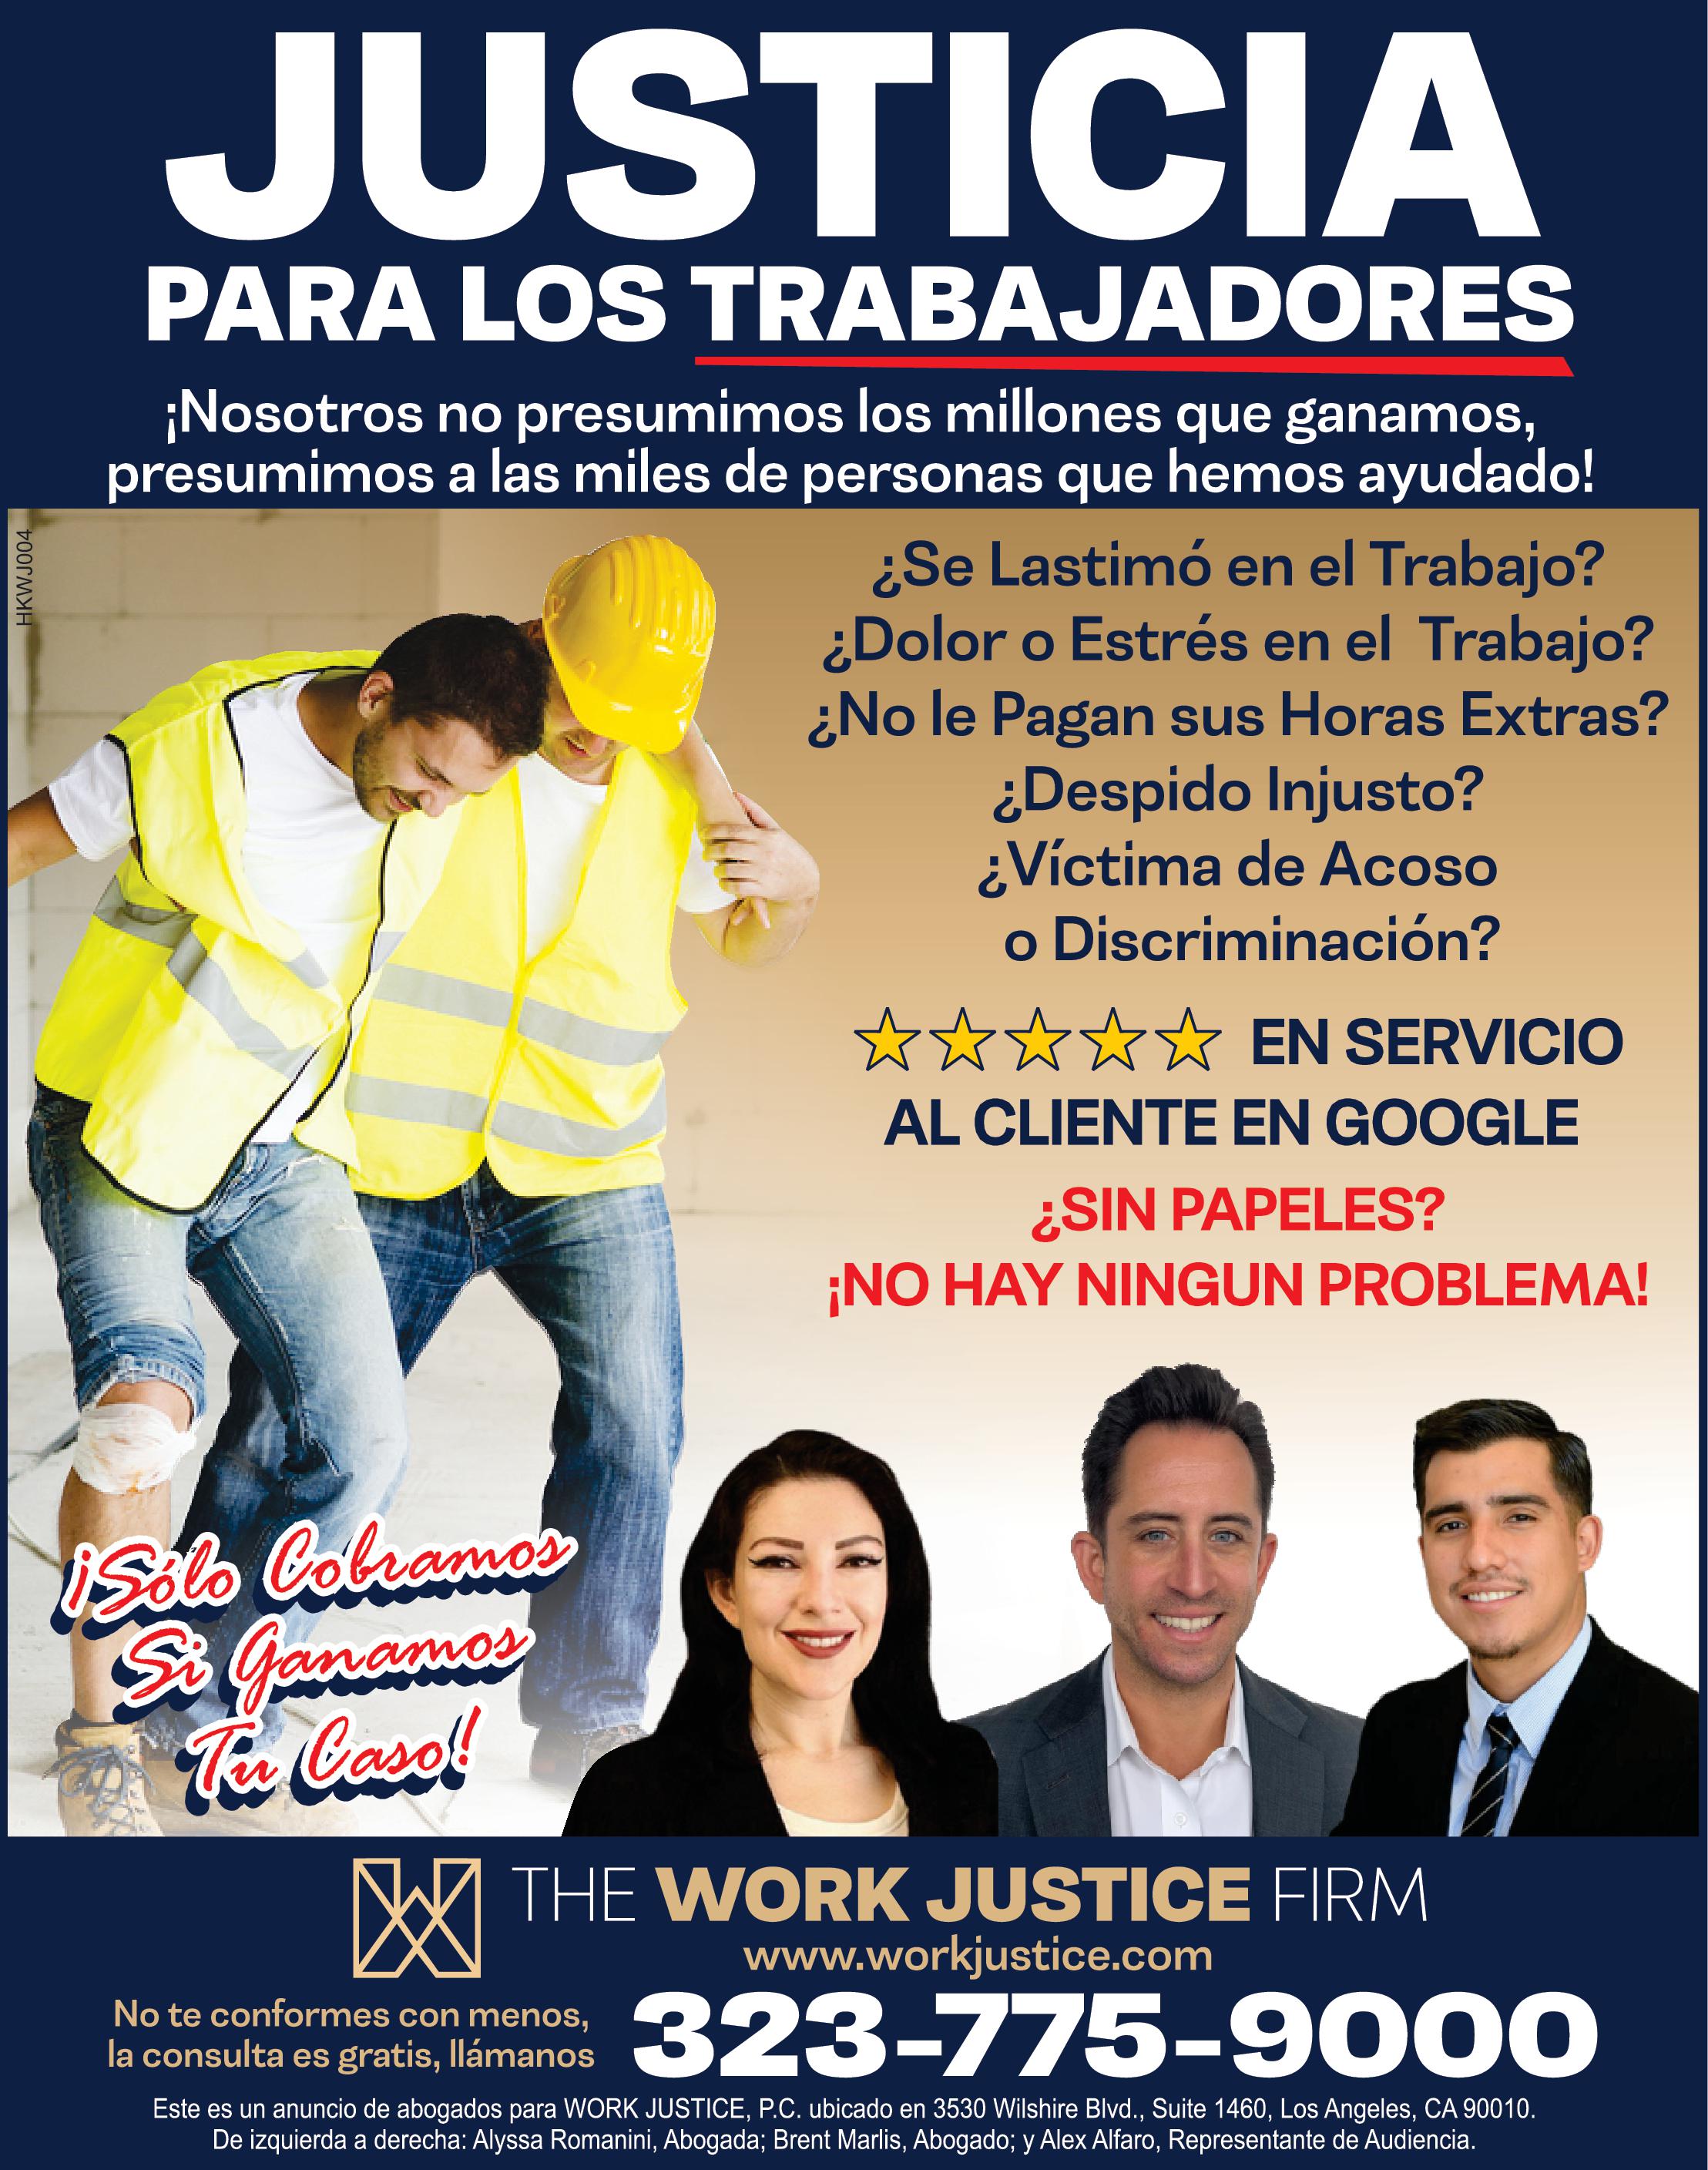 The Work Justice Firm